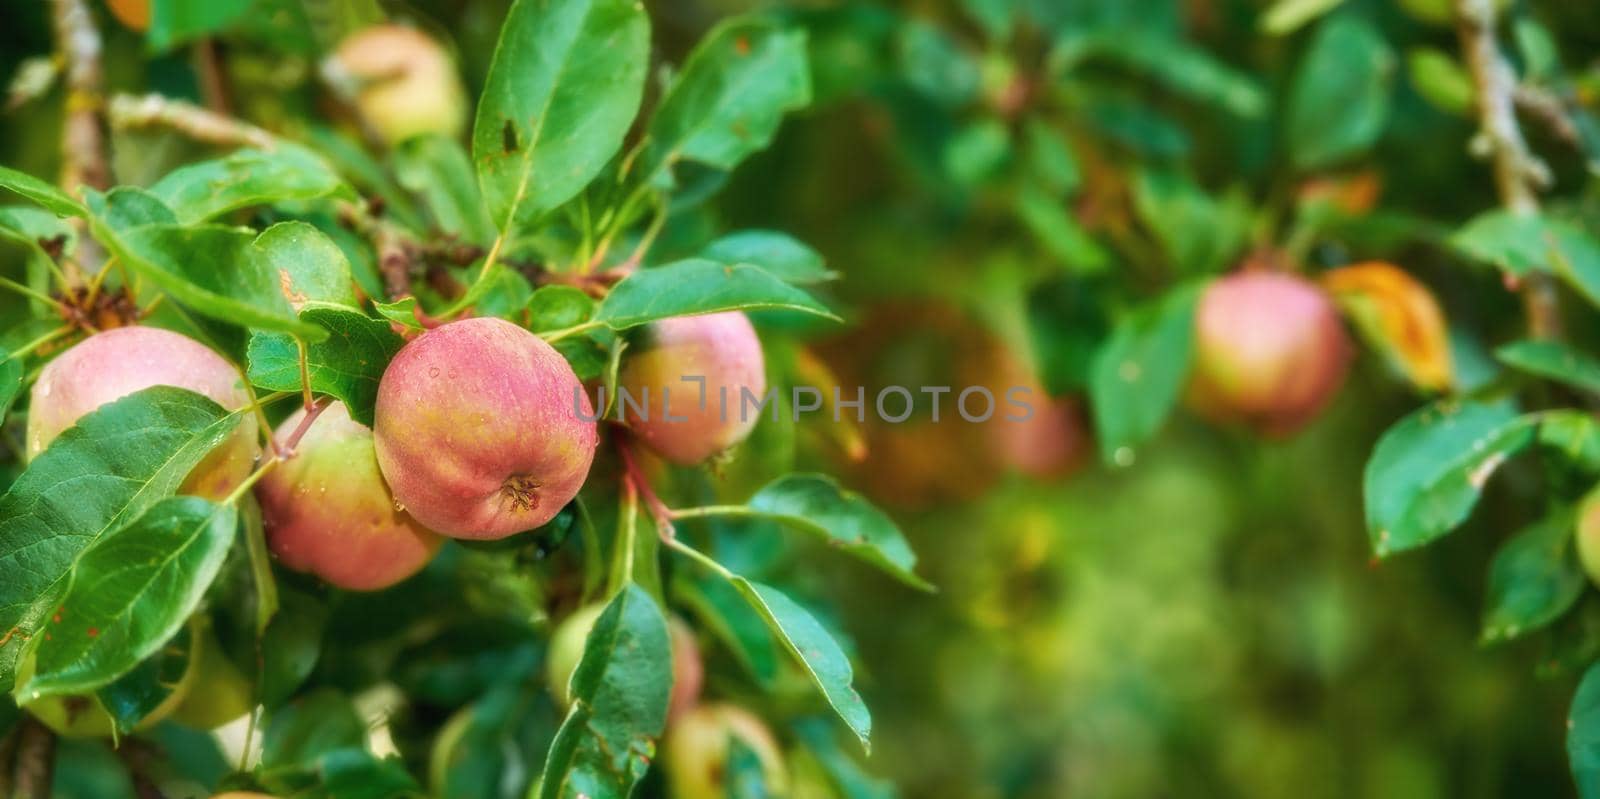 Red apples growing on a lush green fruit tree on a summer day. Fresh and healthy organic food outdoors in a garden. Closeup of branch with produce crops hanging ready for harvest on a farm